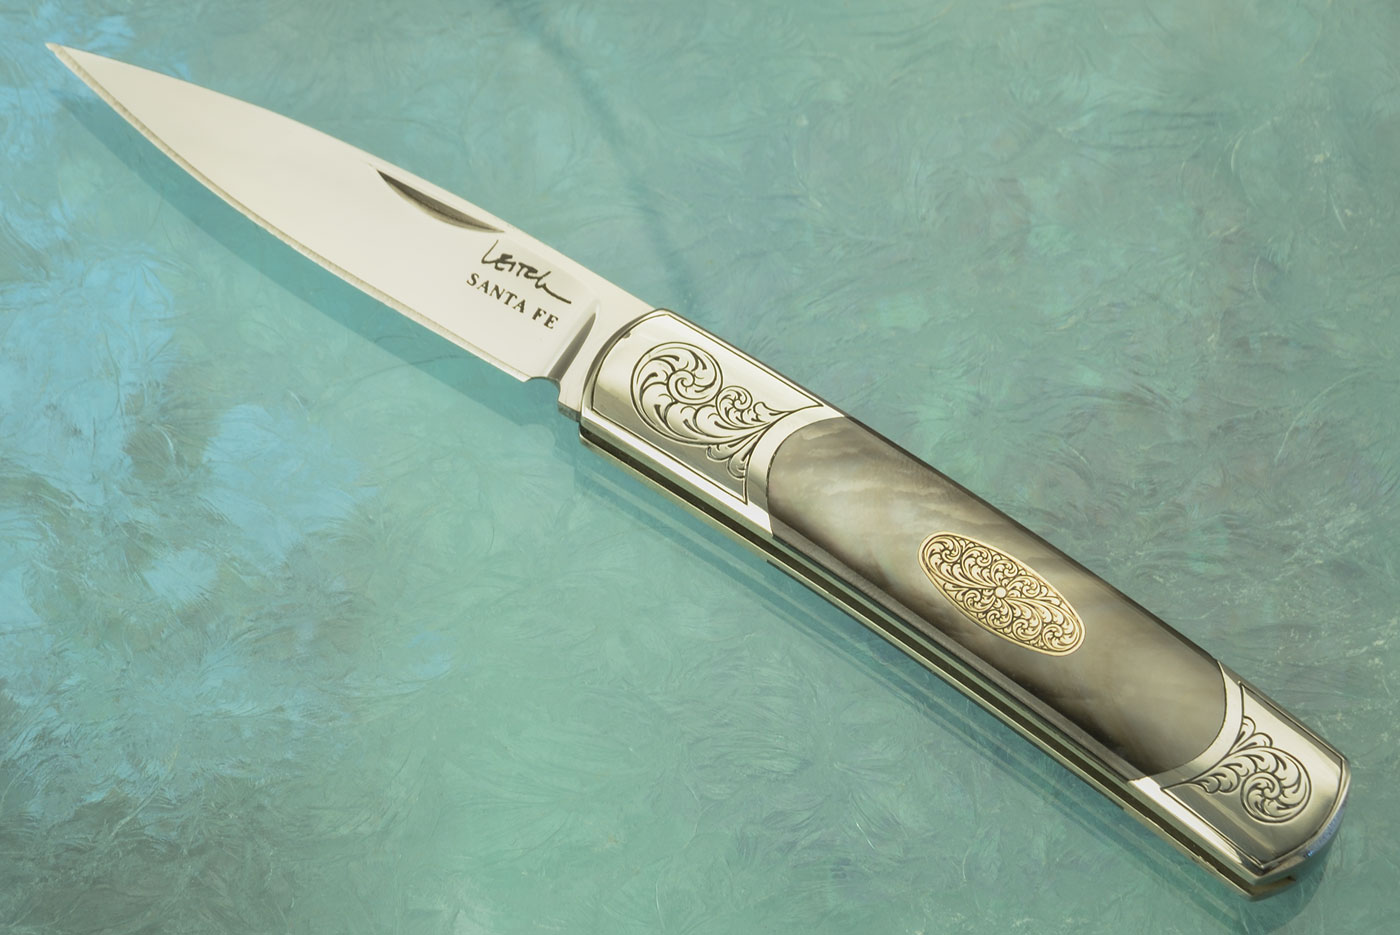 Acero Slipjoint with Blacklip Mother of Pearl and Gold with Scroll Engraving